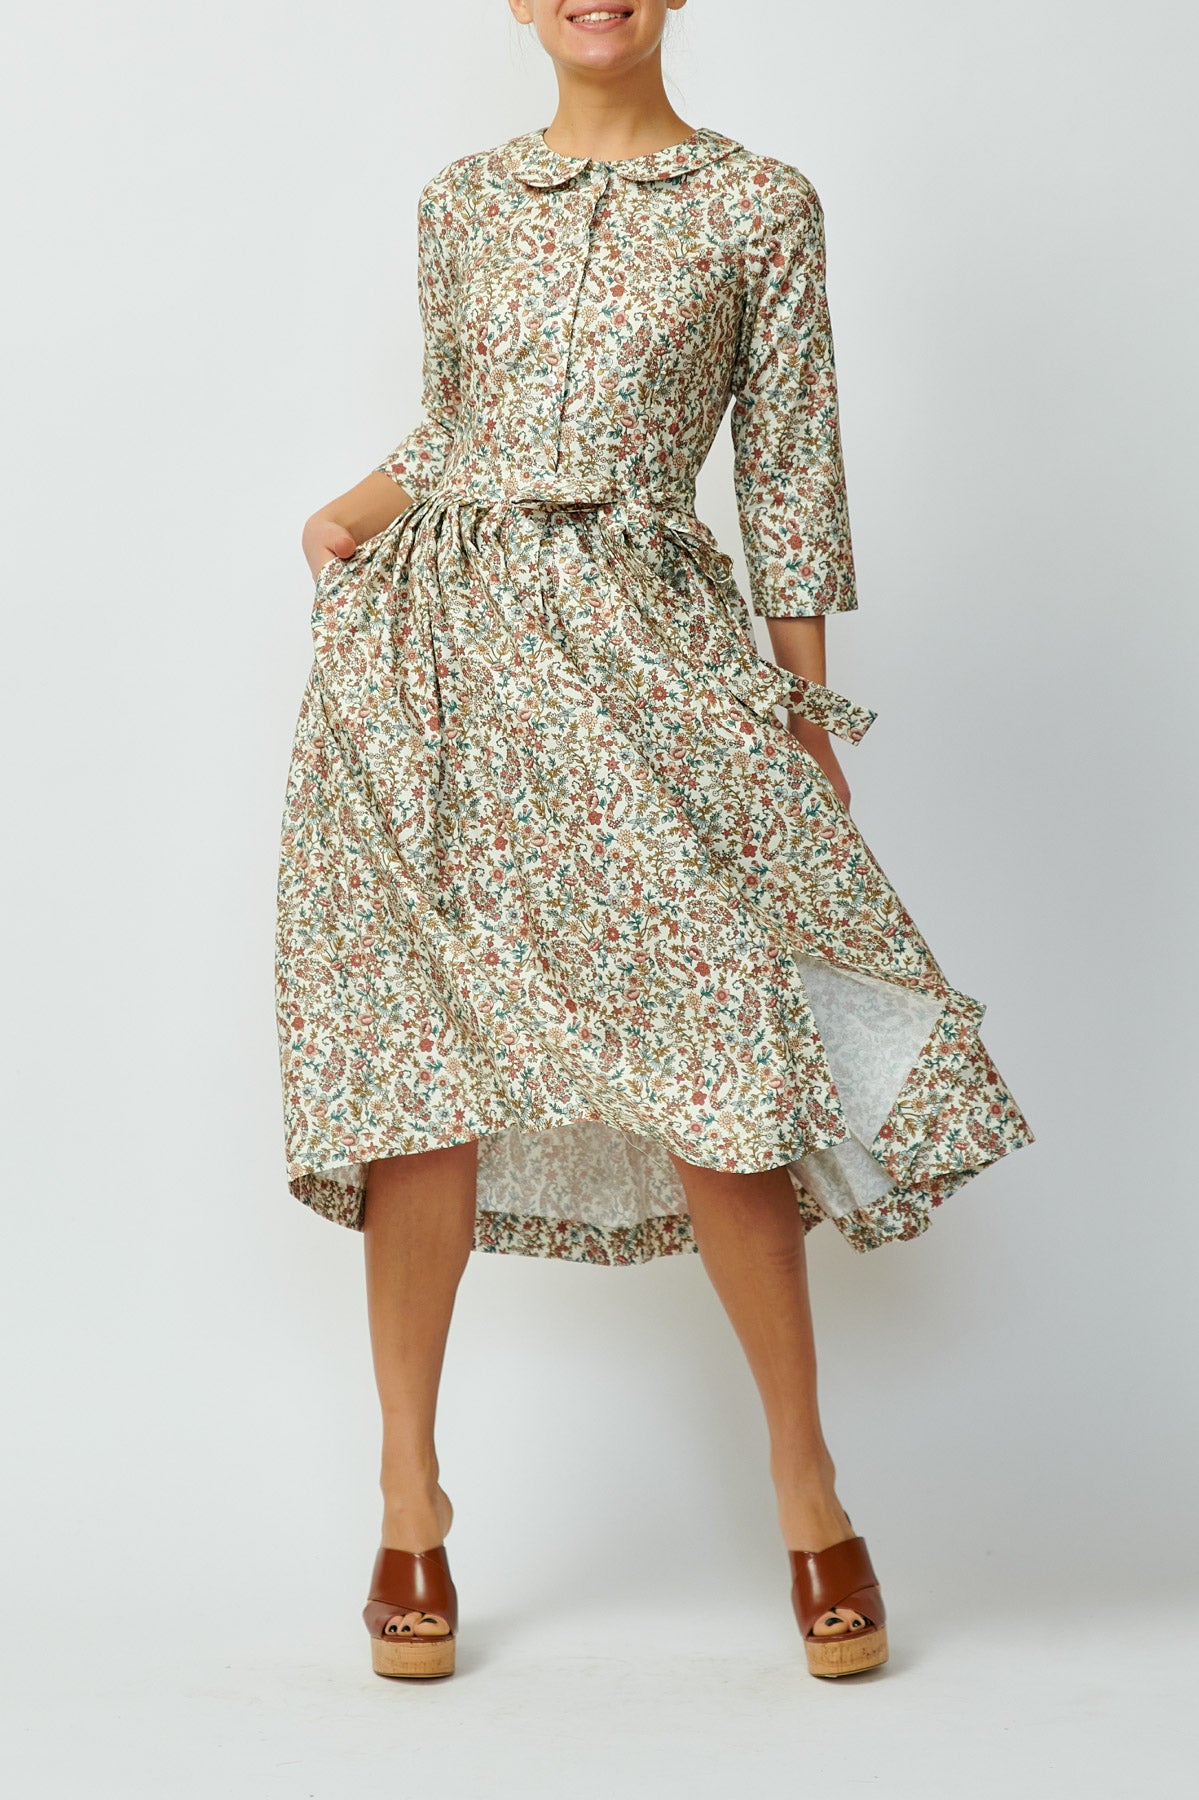 Shirt dress with small flowers on white